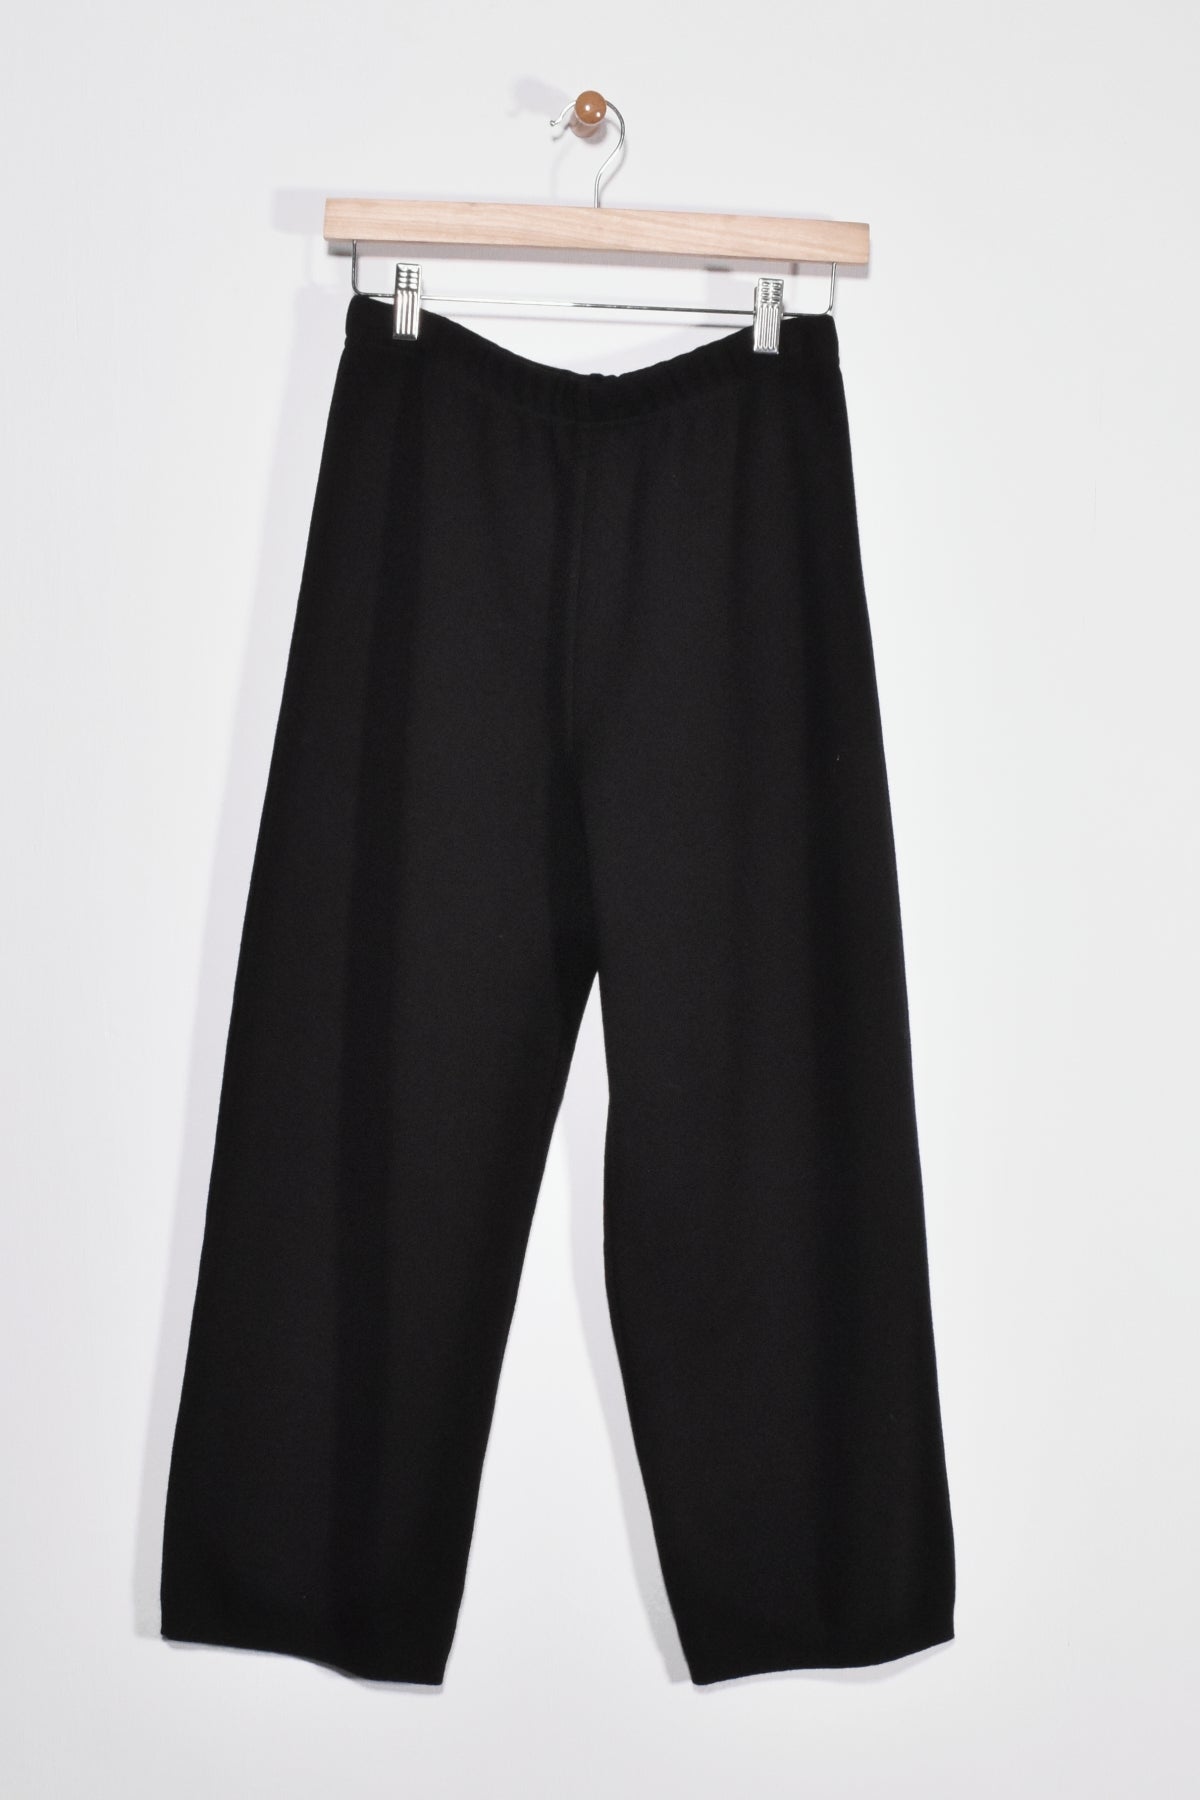 36" Crop Pants with Pockets New Orleans Knitwear